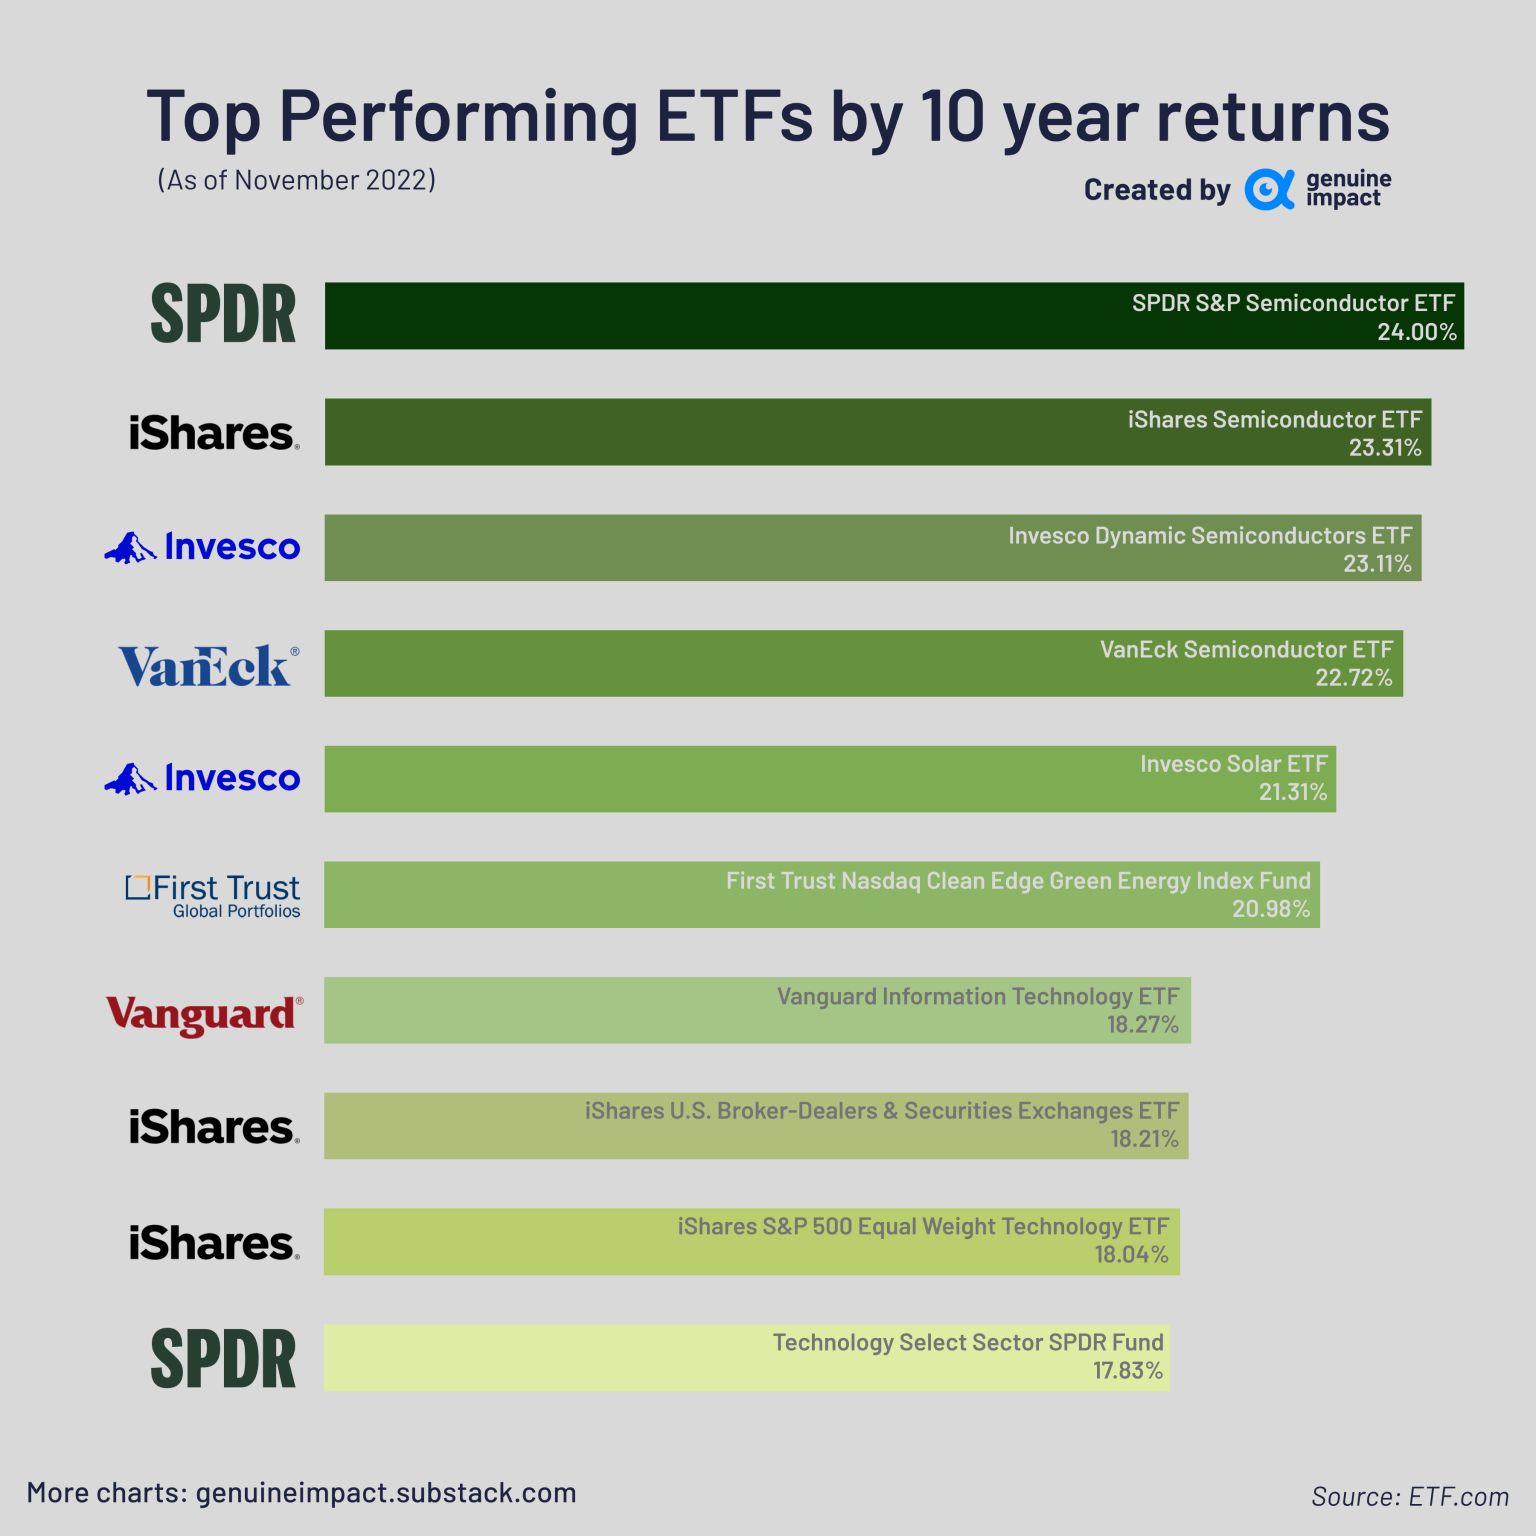 ‘SPDR S&P Semiconductor ETF’ has the highest 10-year returns at 24%.